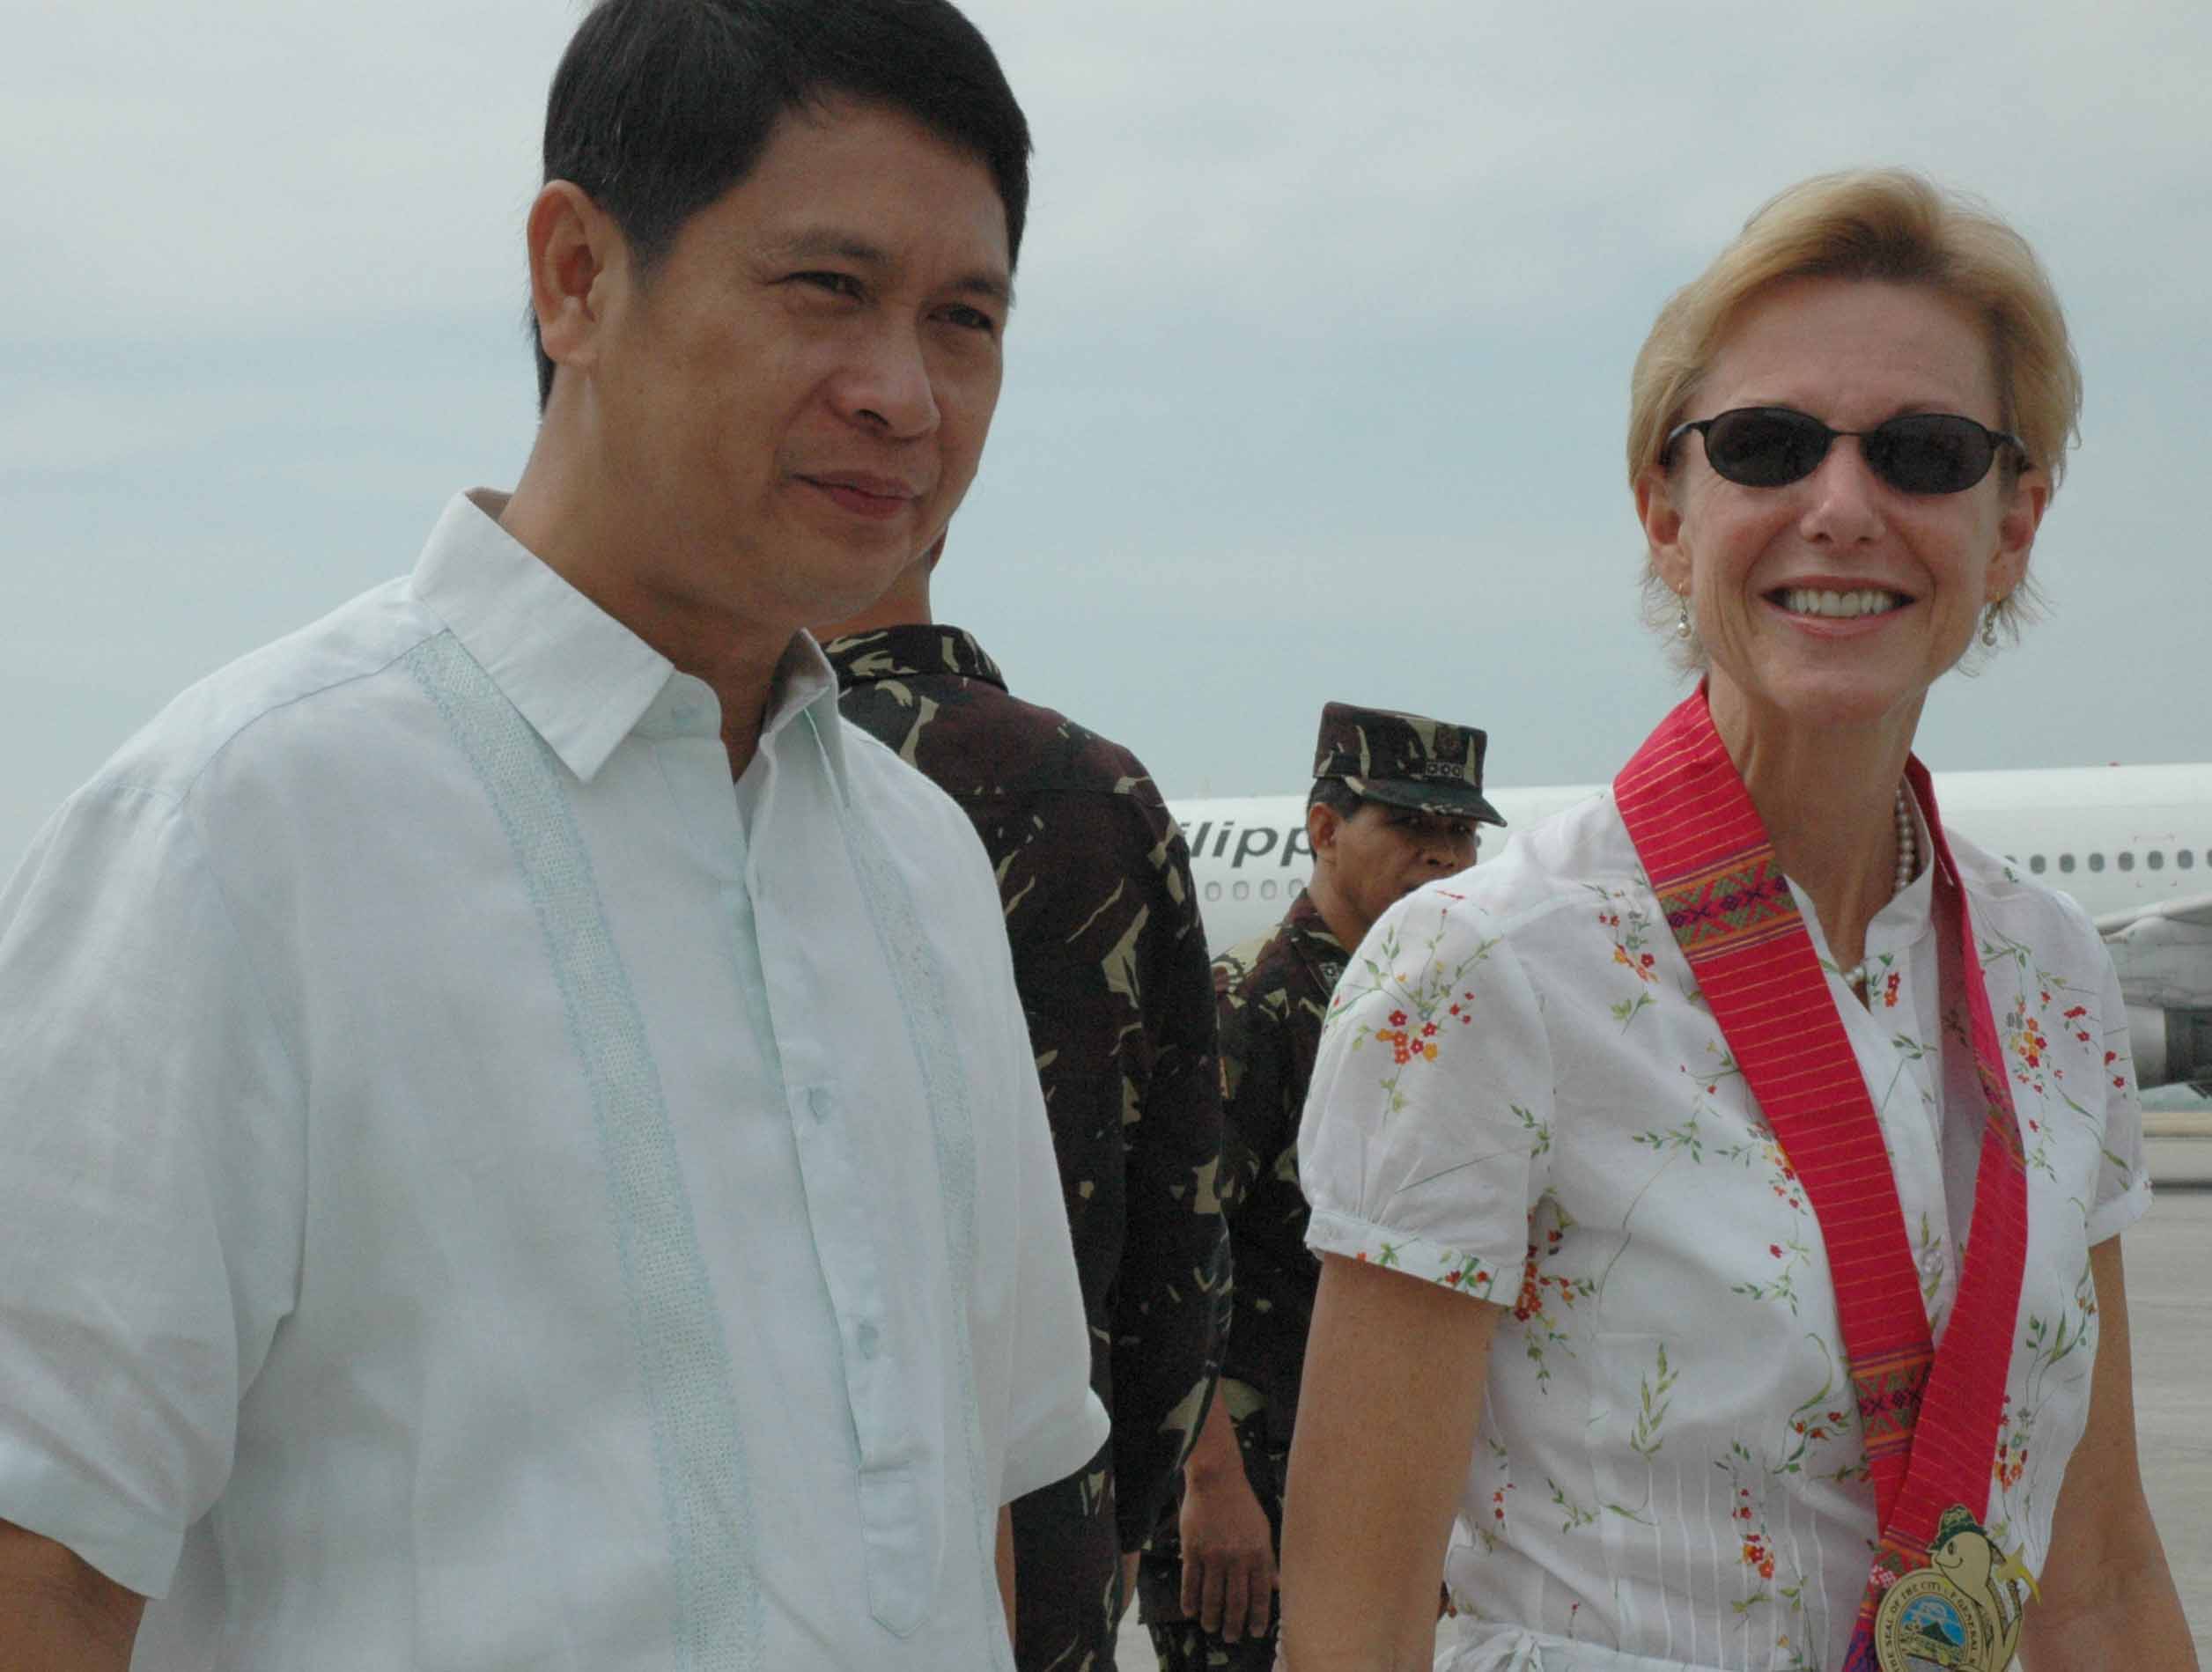 GENSAN MAYOR JUN ACHARON AND AMBASSADOR KENNEY EARLIER AT THE GENSAN AIRPORT UPON THE LATTER'S ARRIVAL